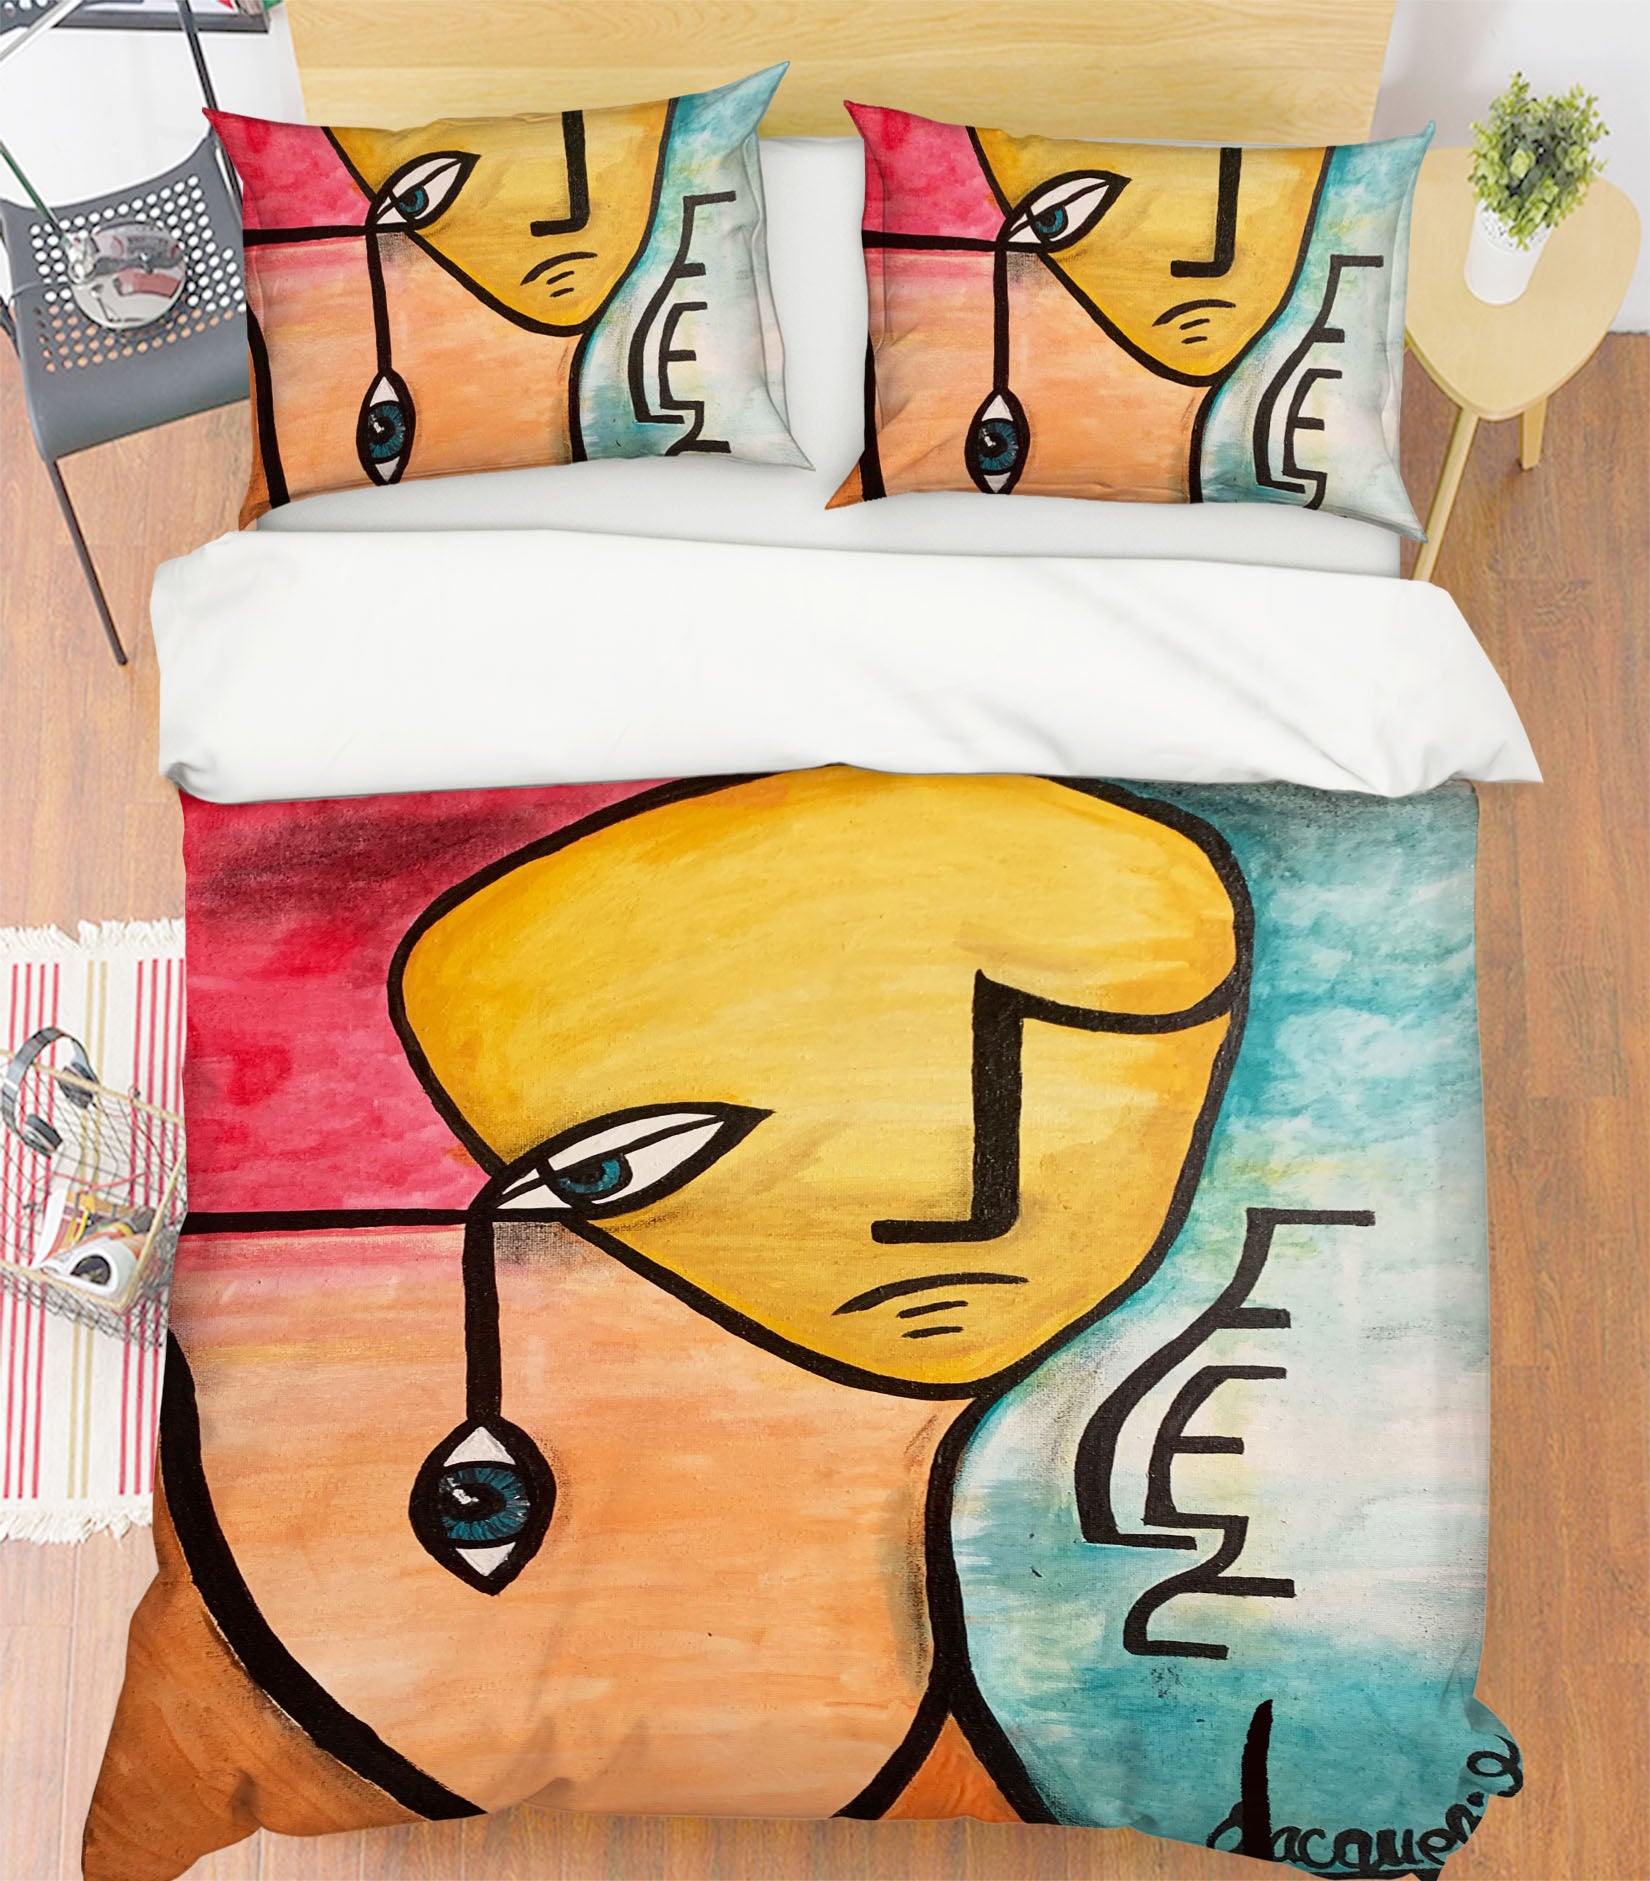 3D Eye Caricature 3032 Jacqueline Reynoso Bedding Bed Pillowcases Quilt Cover Duvet Cover